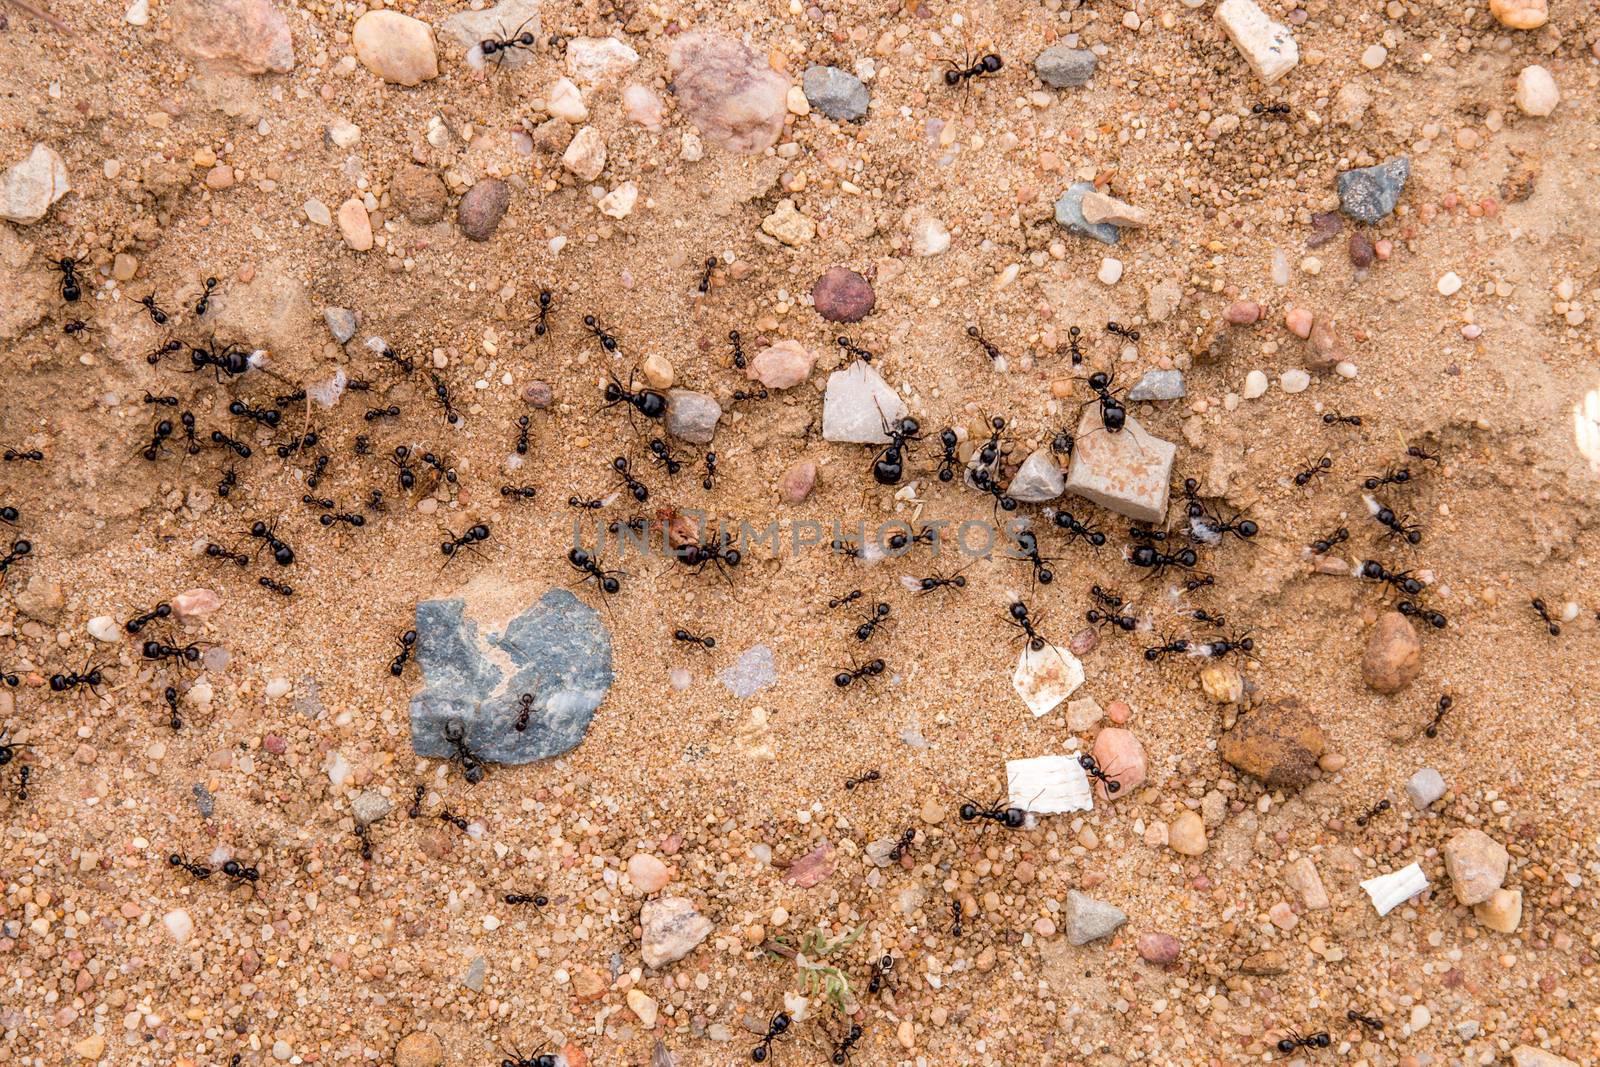 Black ants creating a path to the burrow.